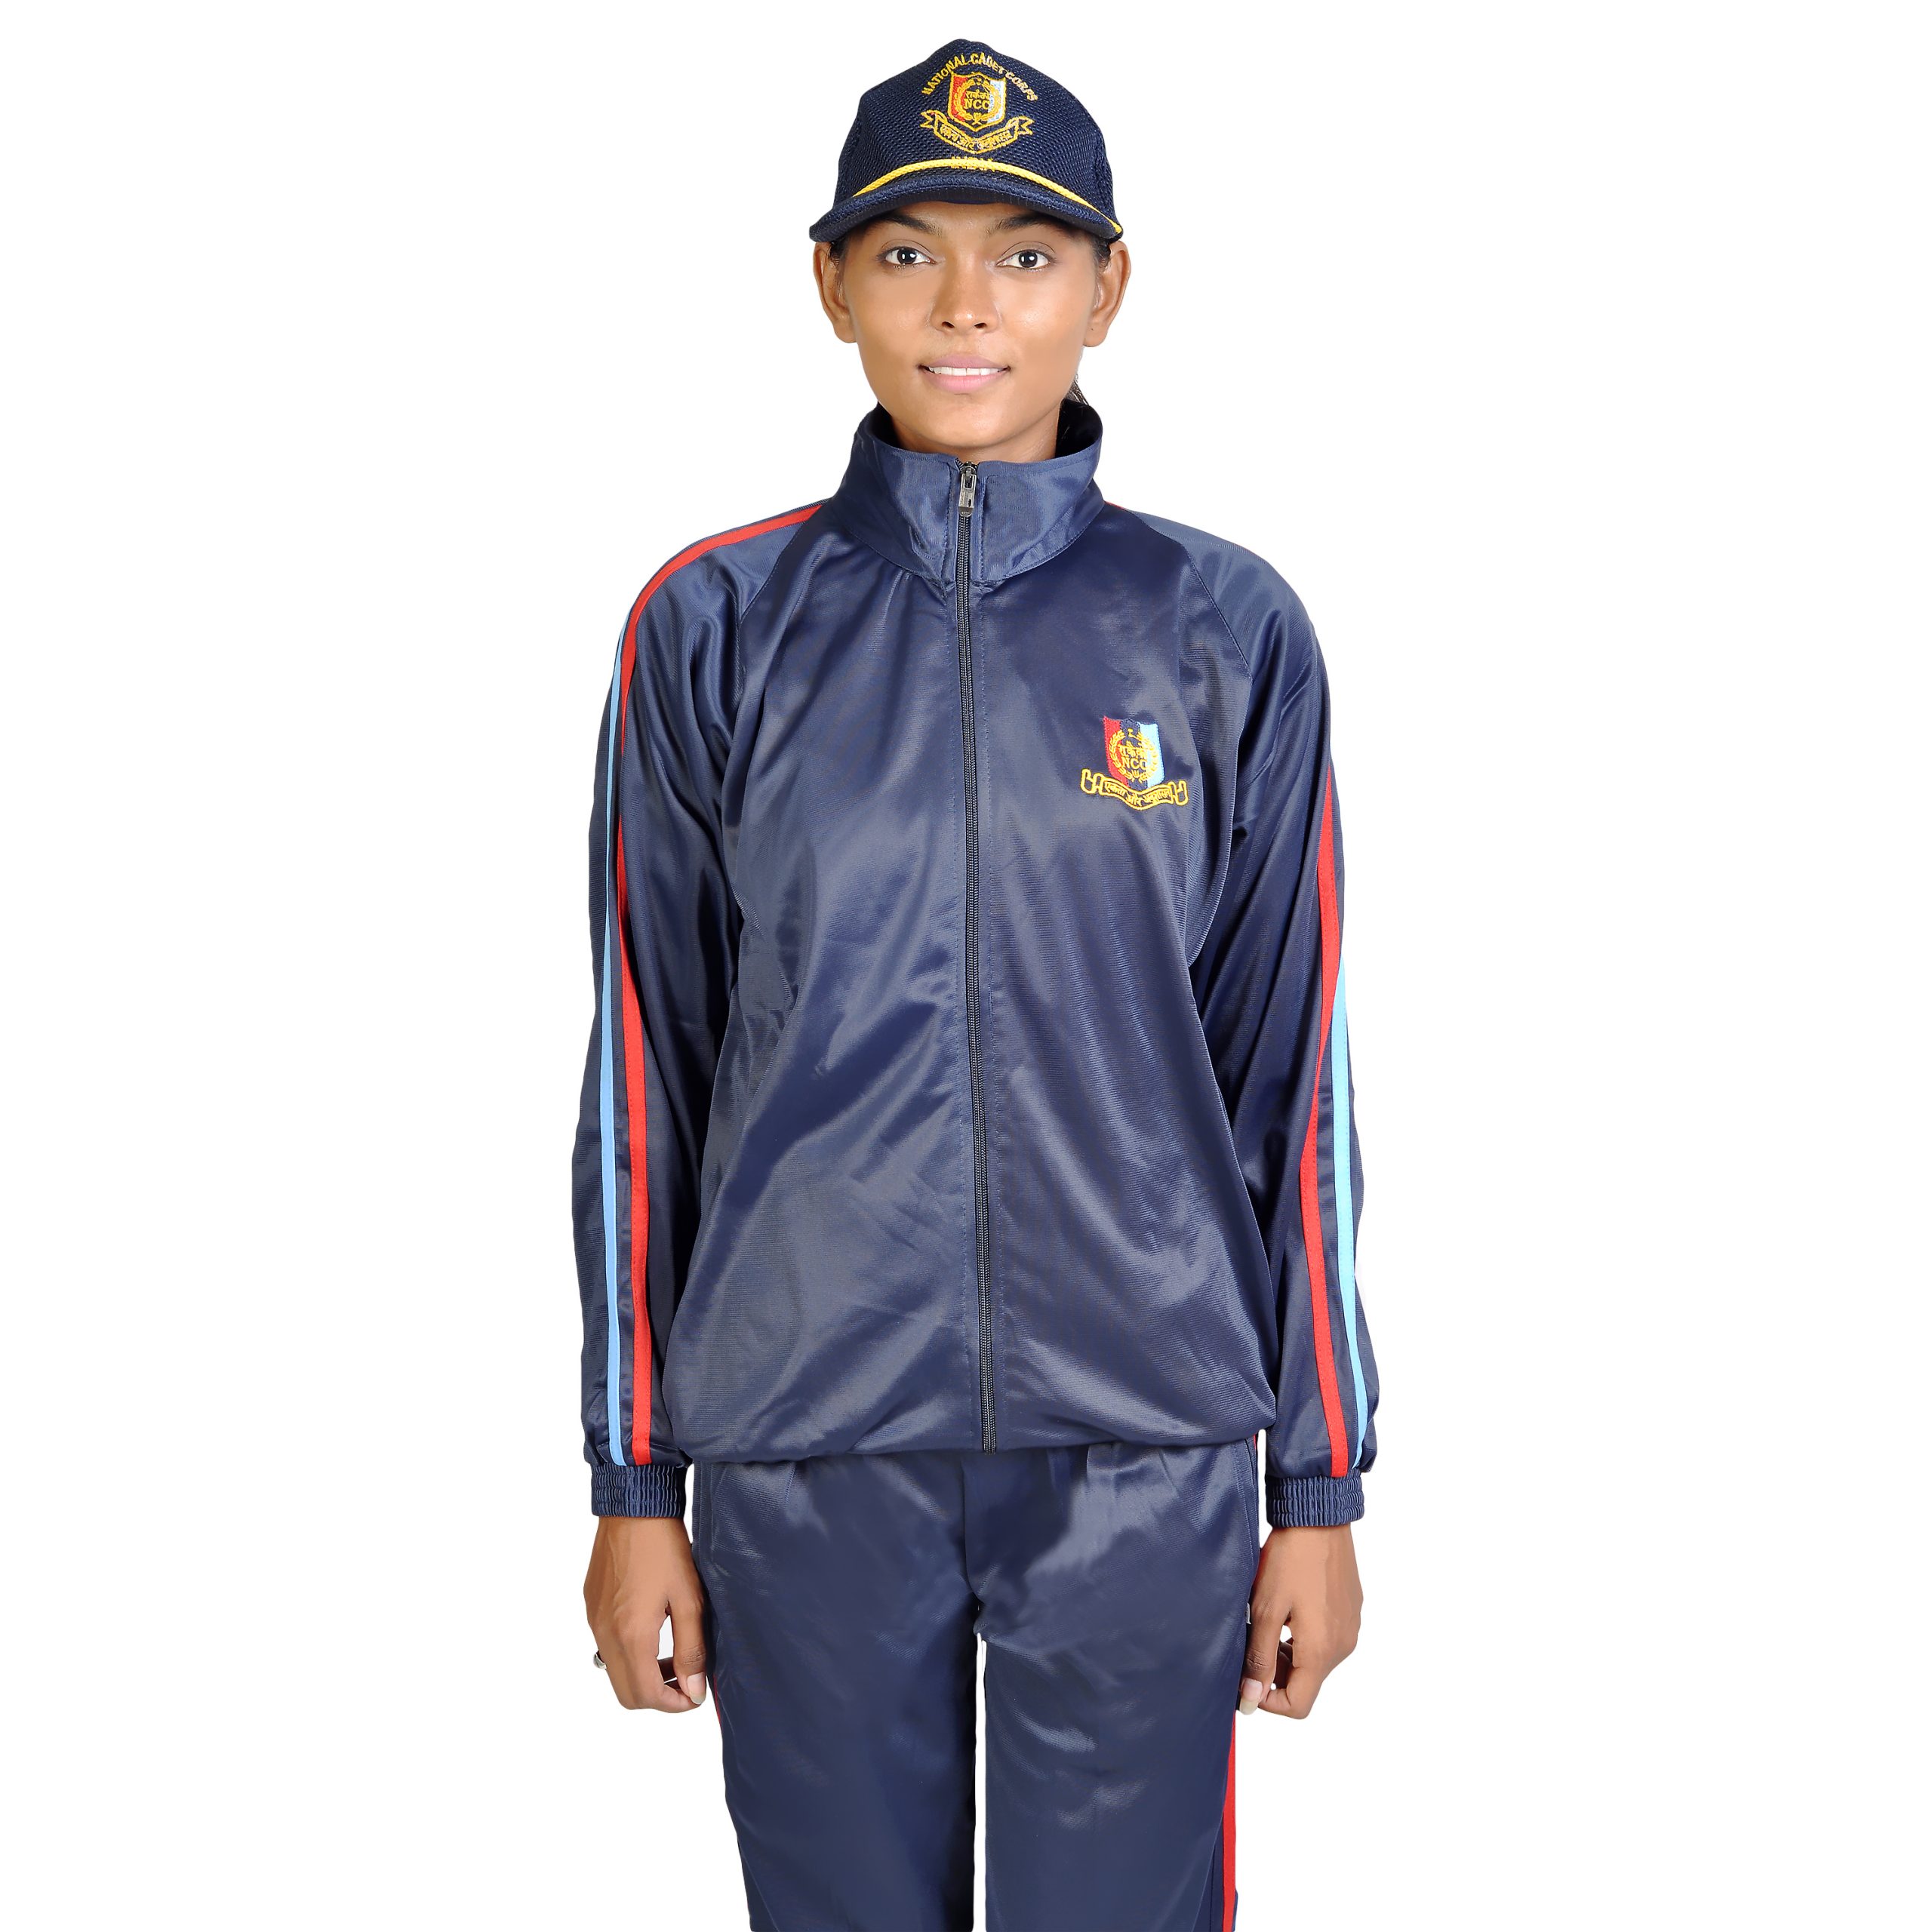 Buy NCC Uniform Tracksuit-Blue at Amazon.in